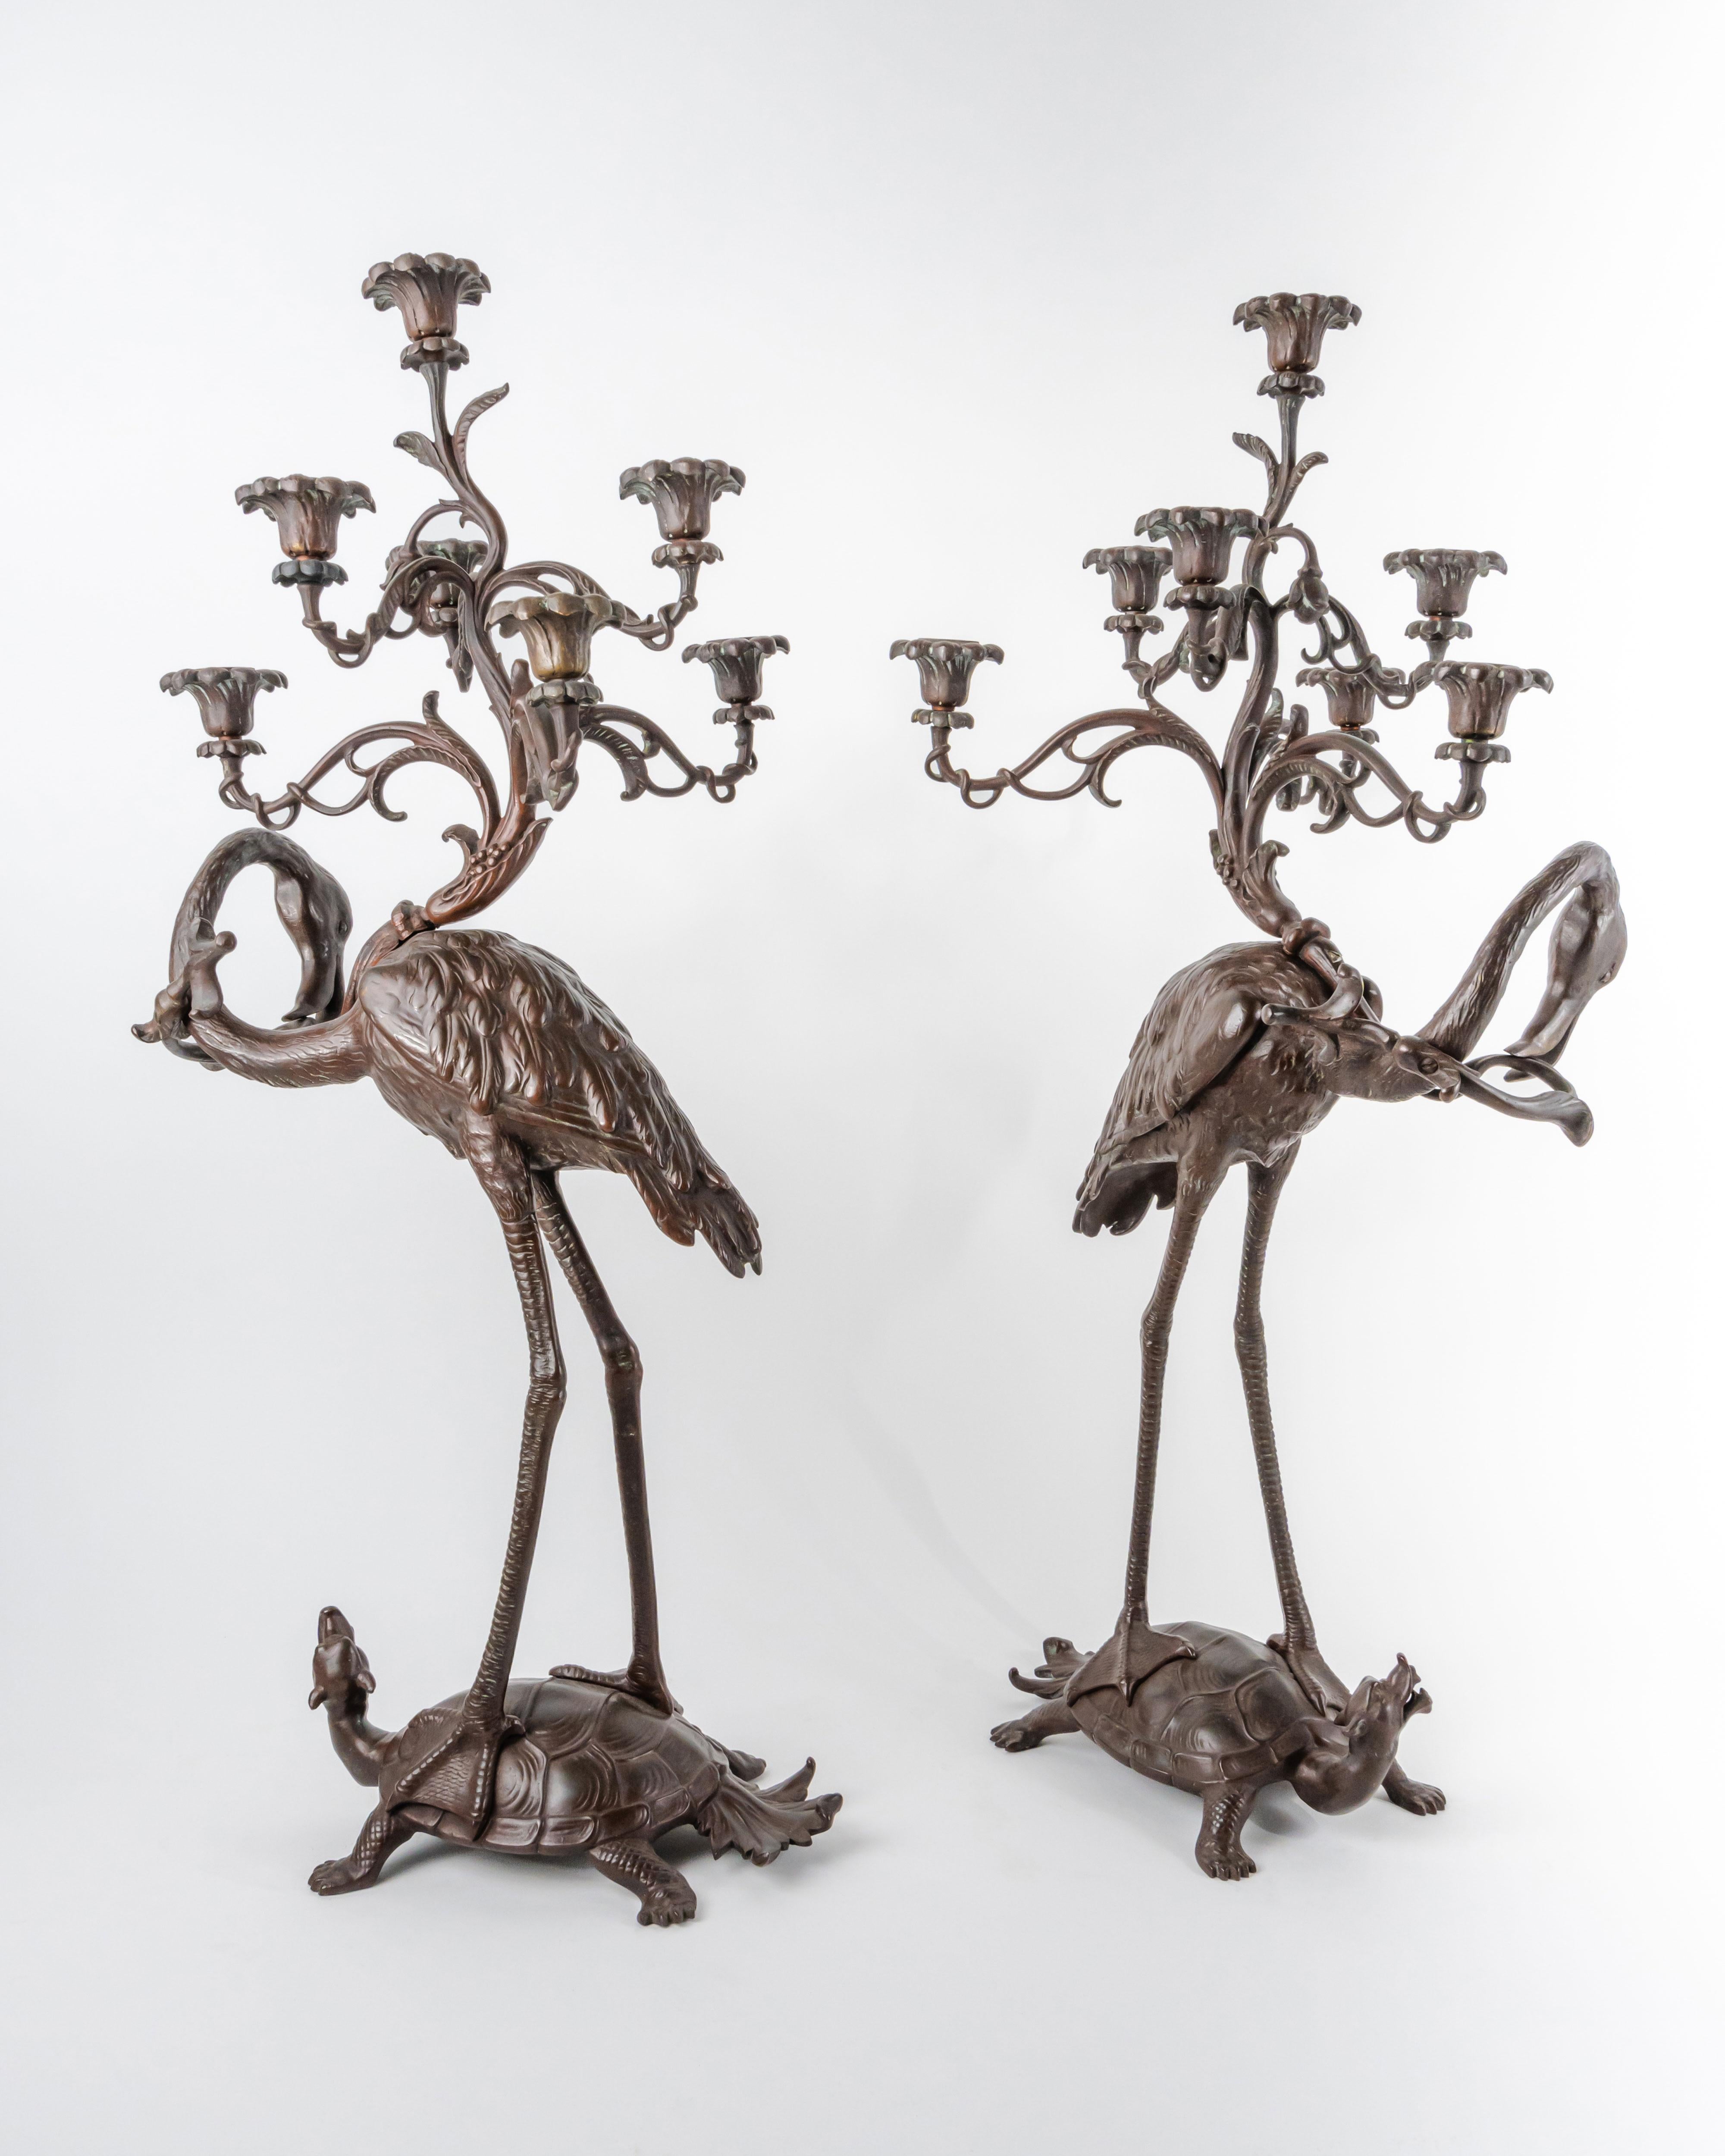 A Pair of French Japonaise patinated bronze seven light candelabras. Circa 1880.
Based on a Japanese model, each as a flamingo holding a budding twig and standing on the back of a mythical tortoise. 

Measures: 28-1/2